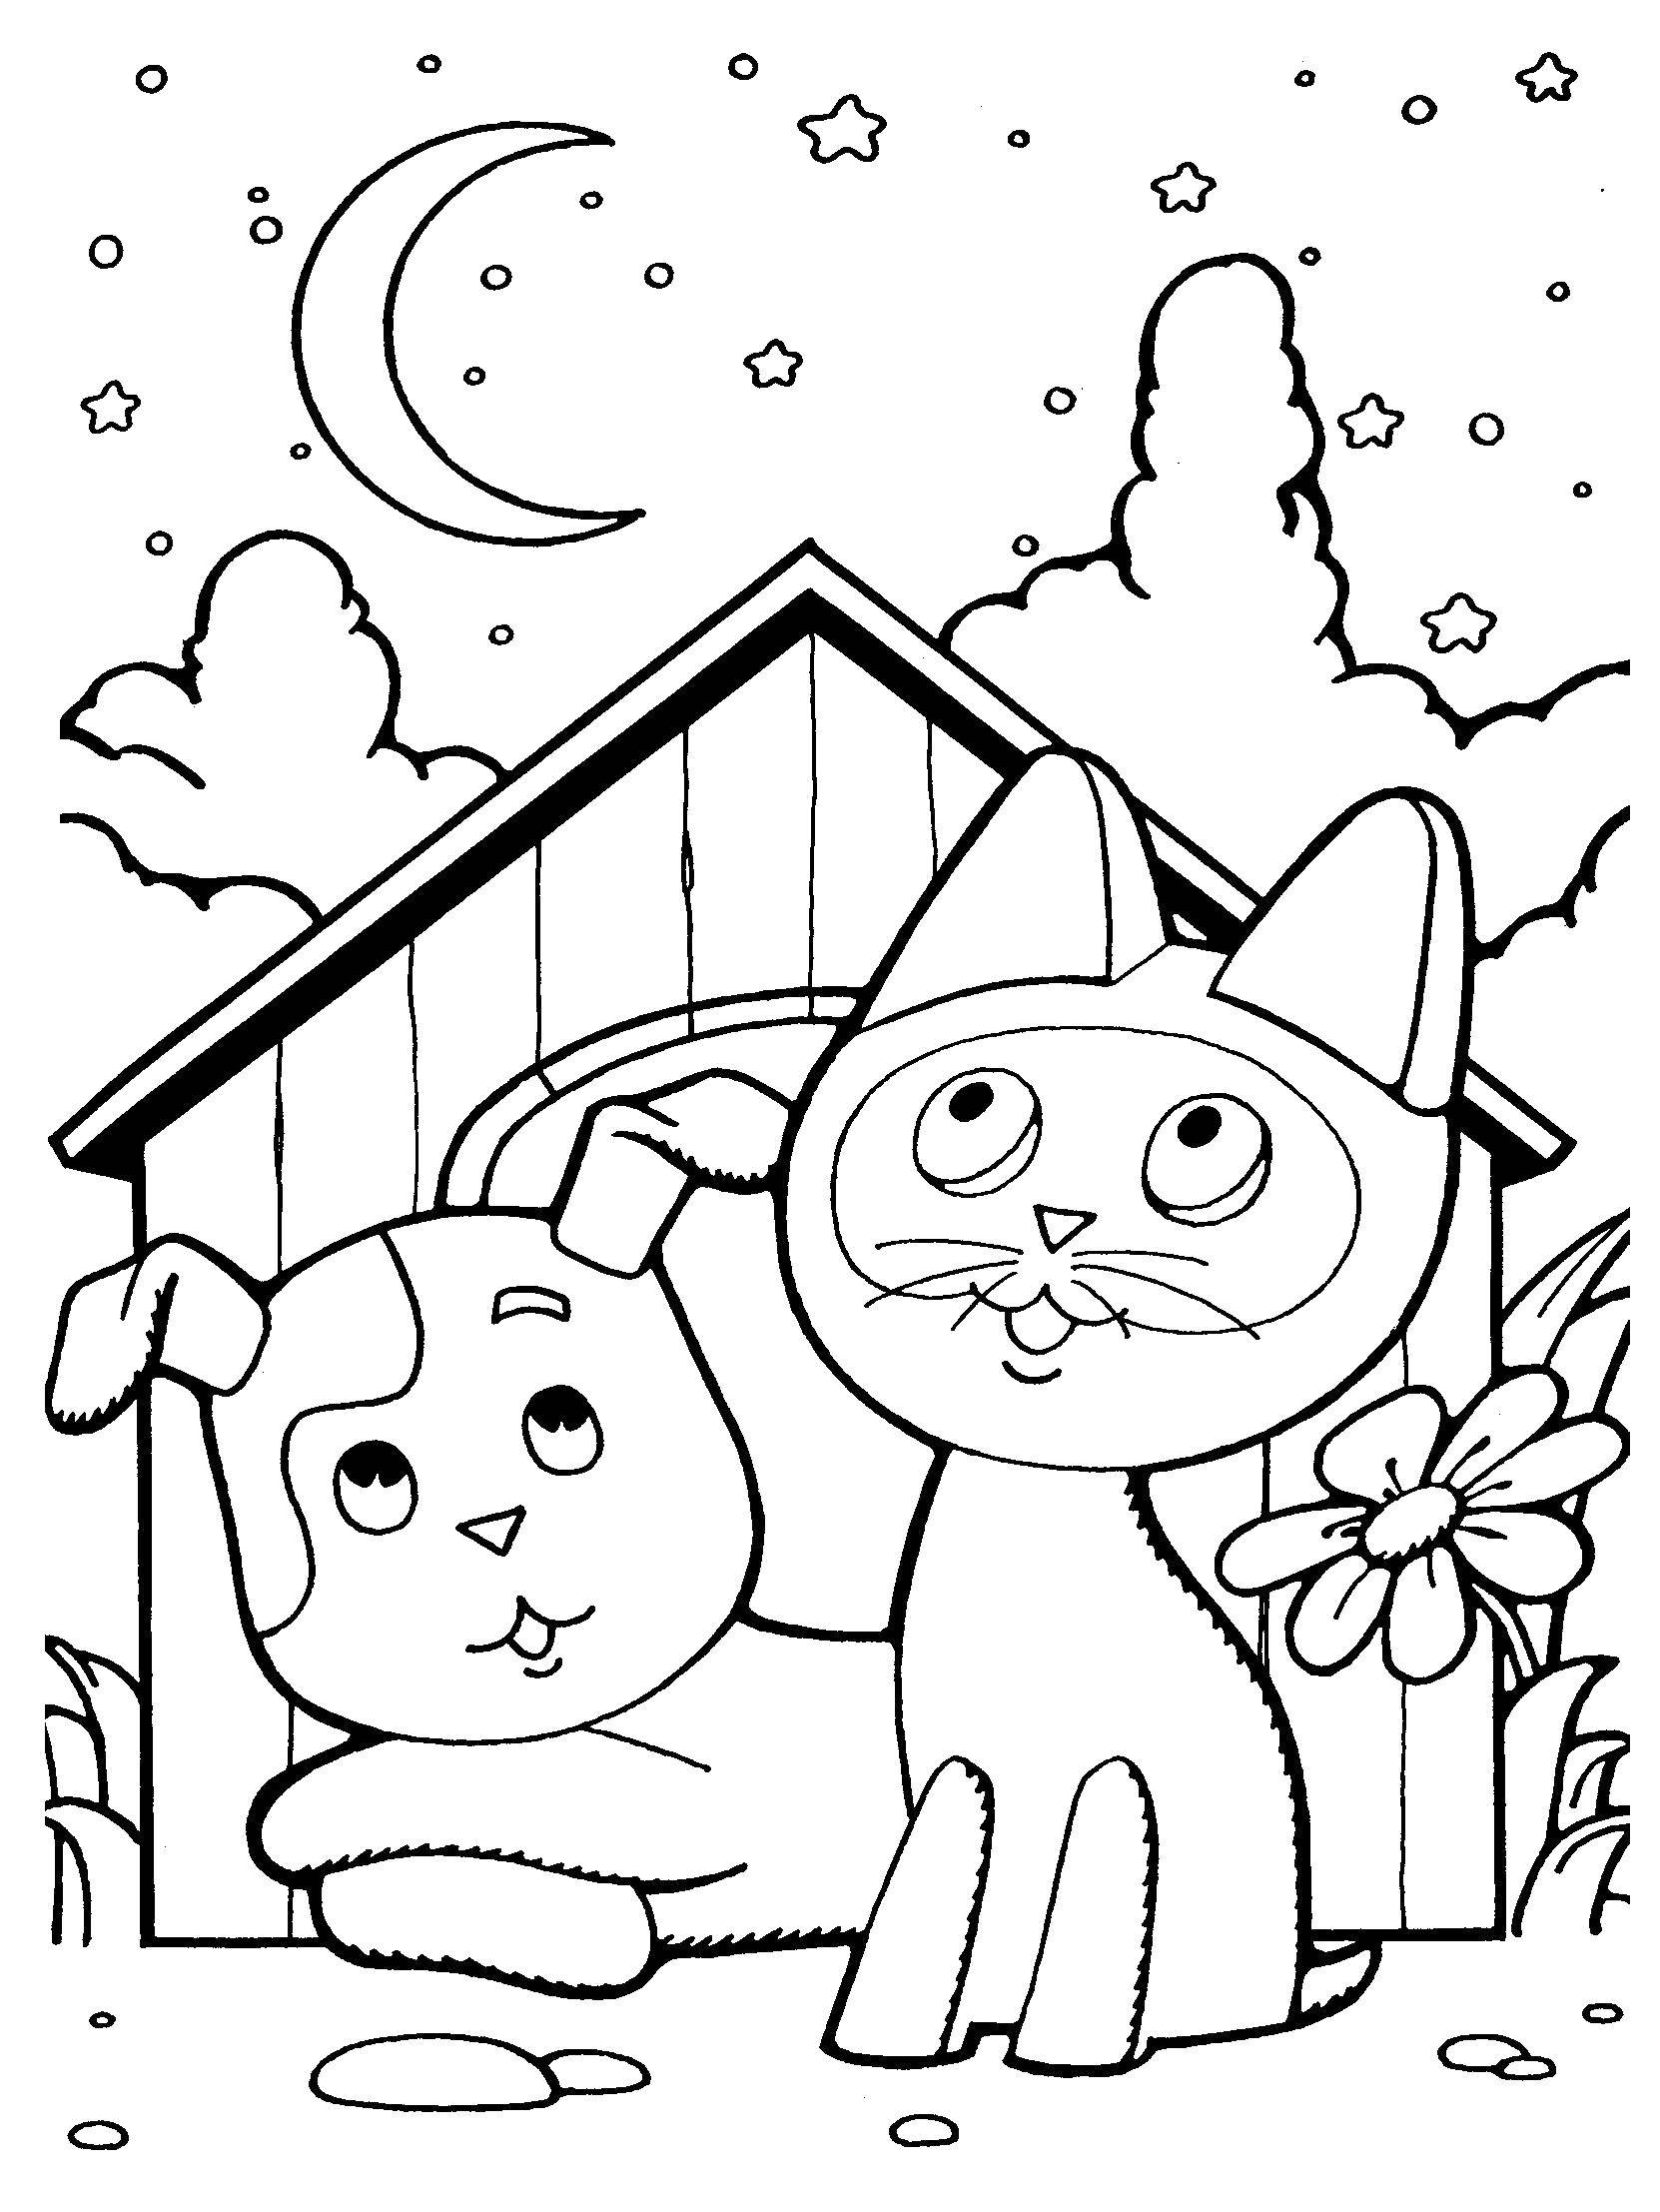 Coloring Kitten named woof and the ball. Category kitten Gav. Tags:  Cartoon character, kitten named woof .